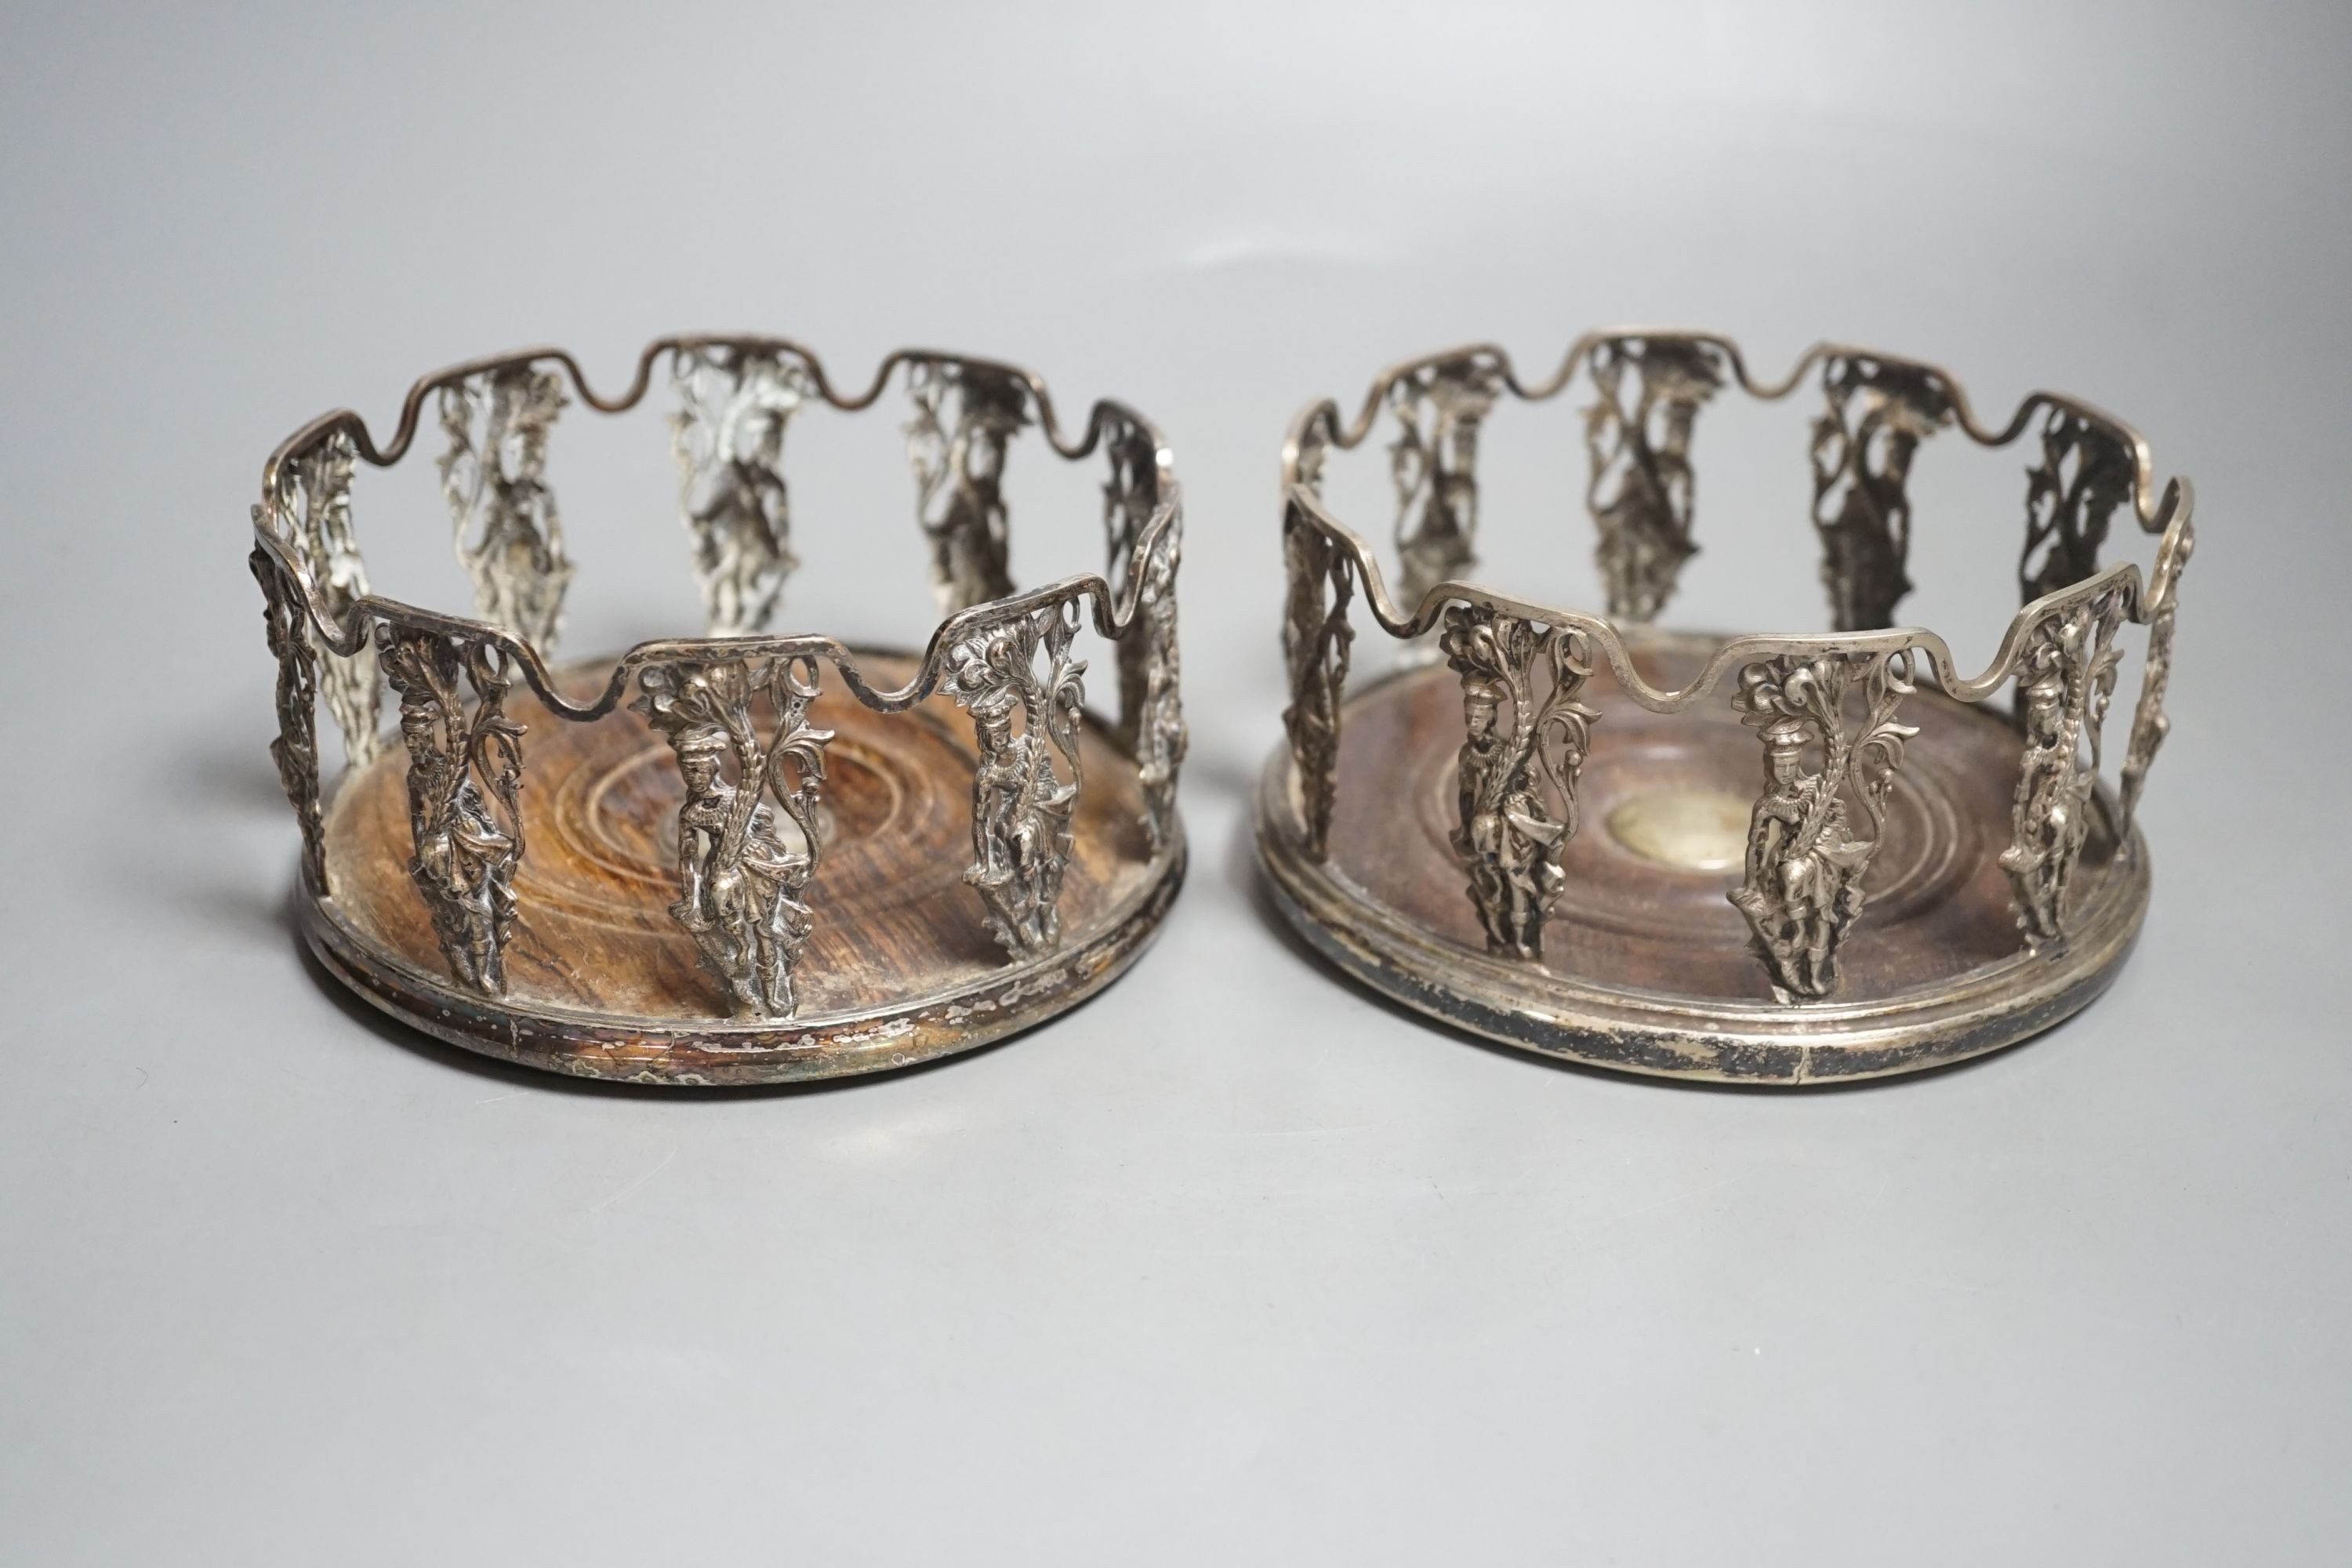 A pair of 19th century Anglo-Indian silver plated figural wine coasters.